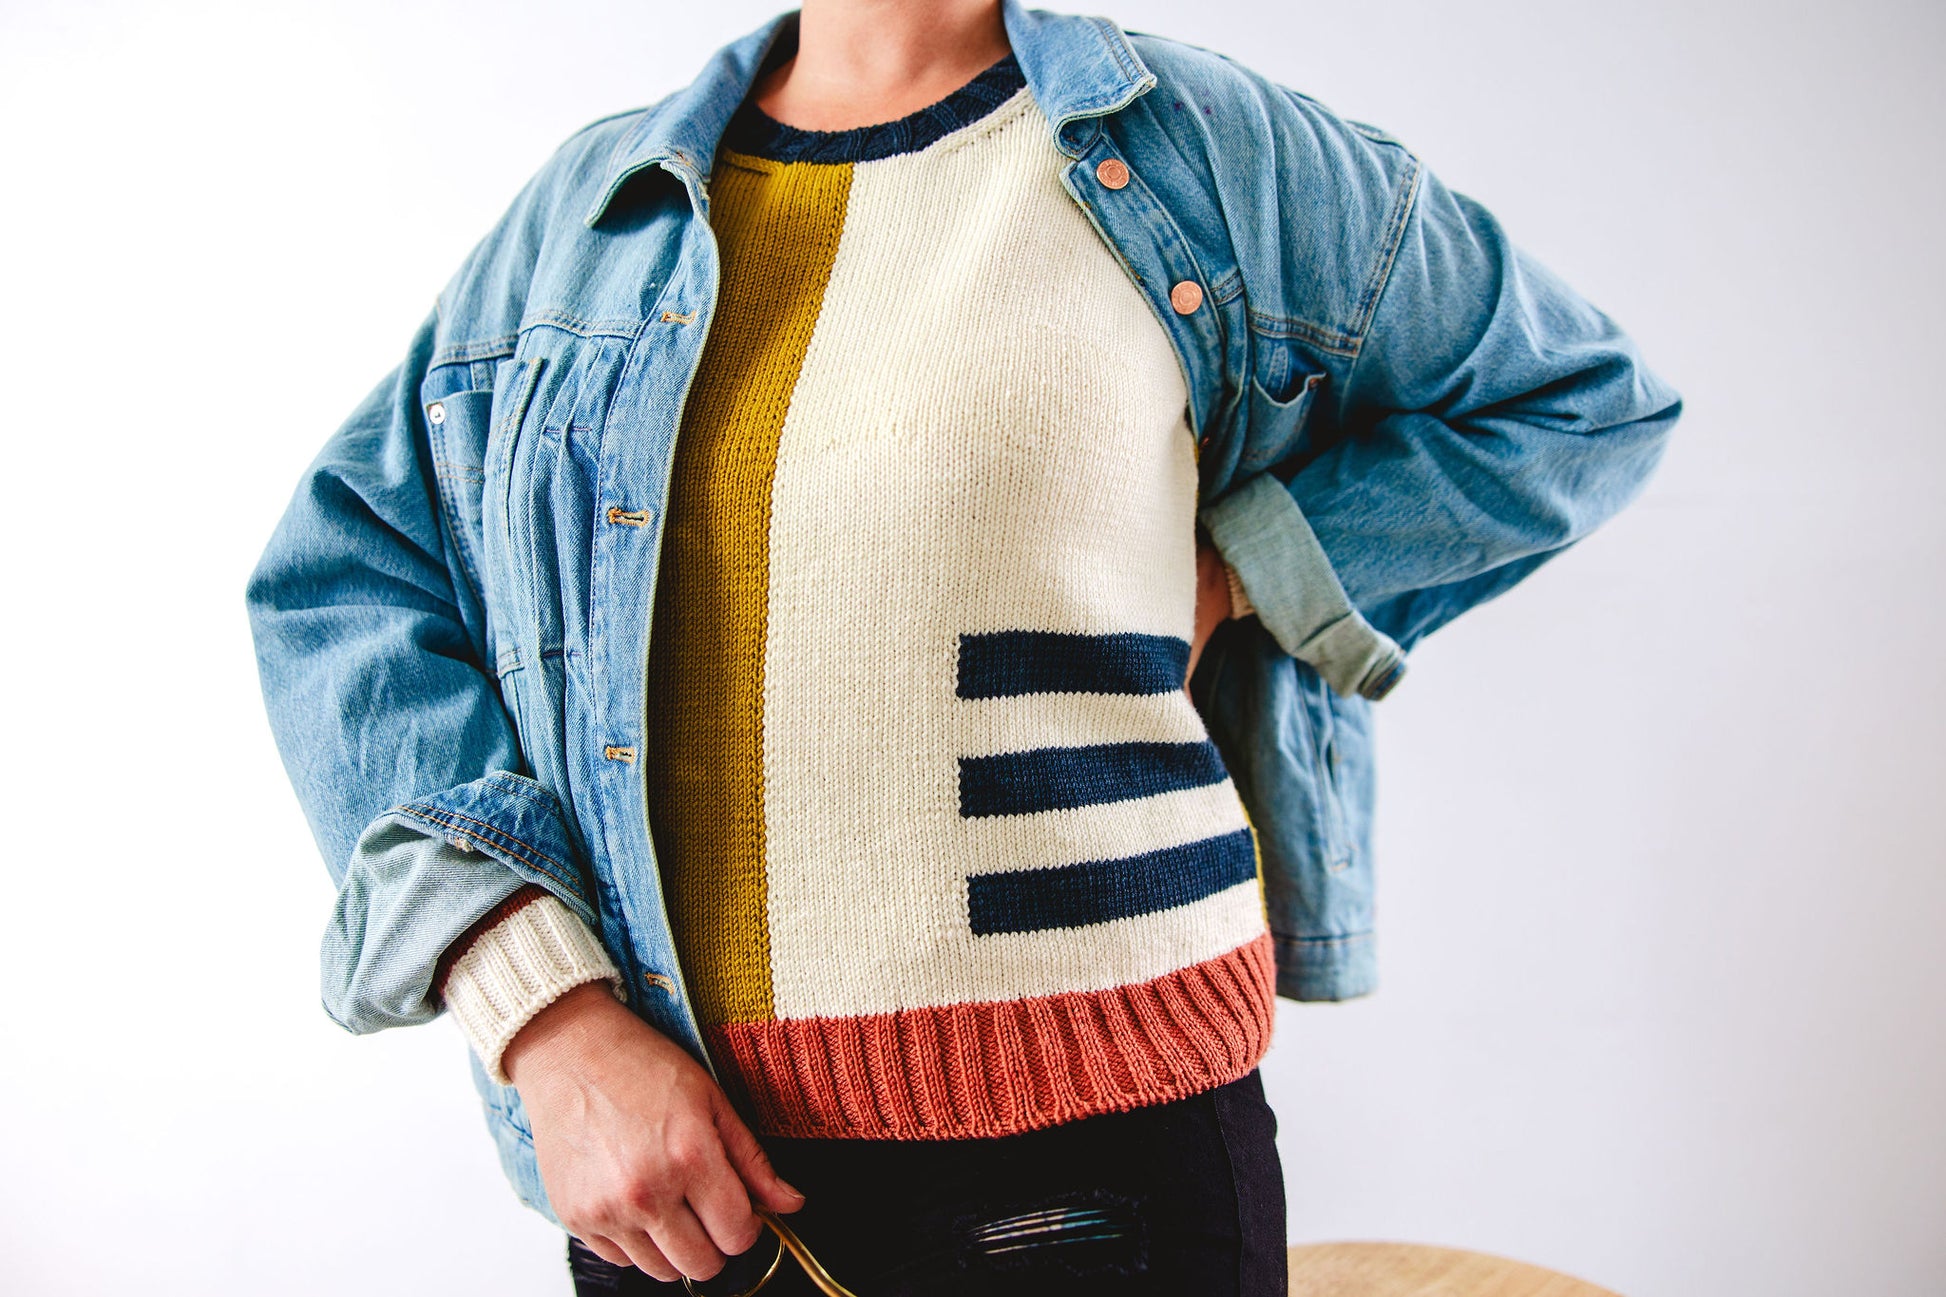 Seen from the shoulders down, Jen wears a denim jacket on top of her hand knit sweater. The sweater uses intarsia techniques to create color blocks of ochre, white, navy blue, and pink.